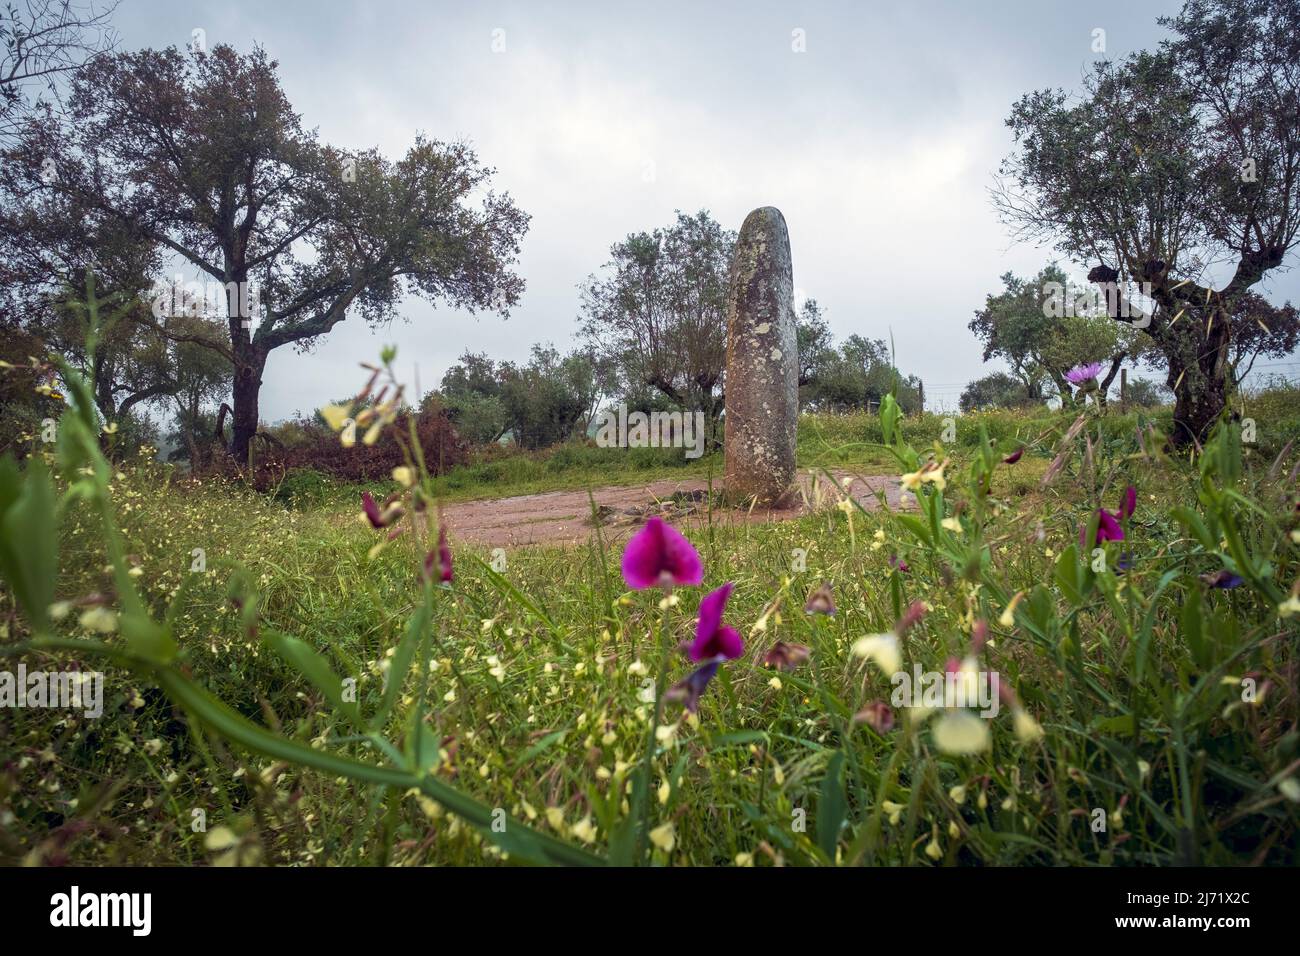 Menhir of Almendres, part of a megalithic stone complex near Evora, Portugal Stock Photo